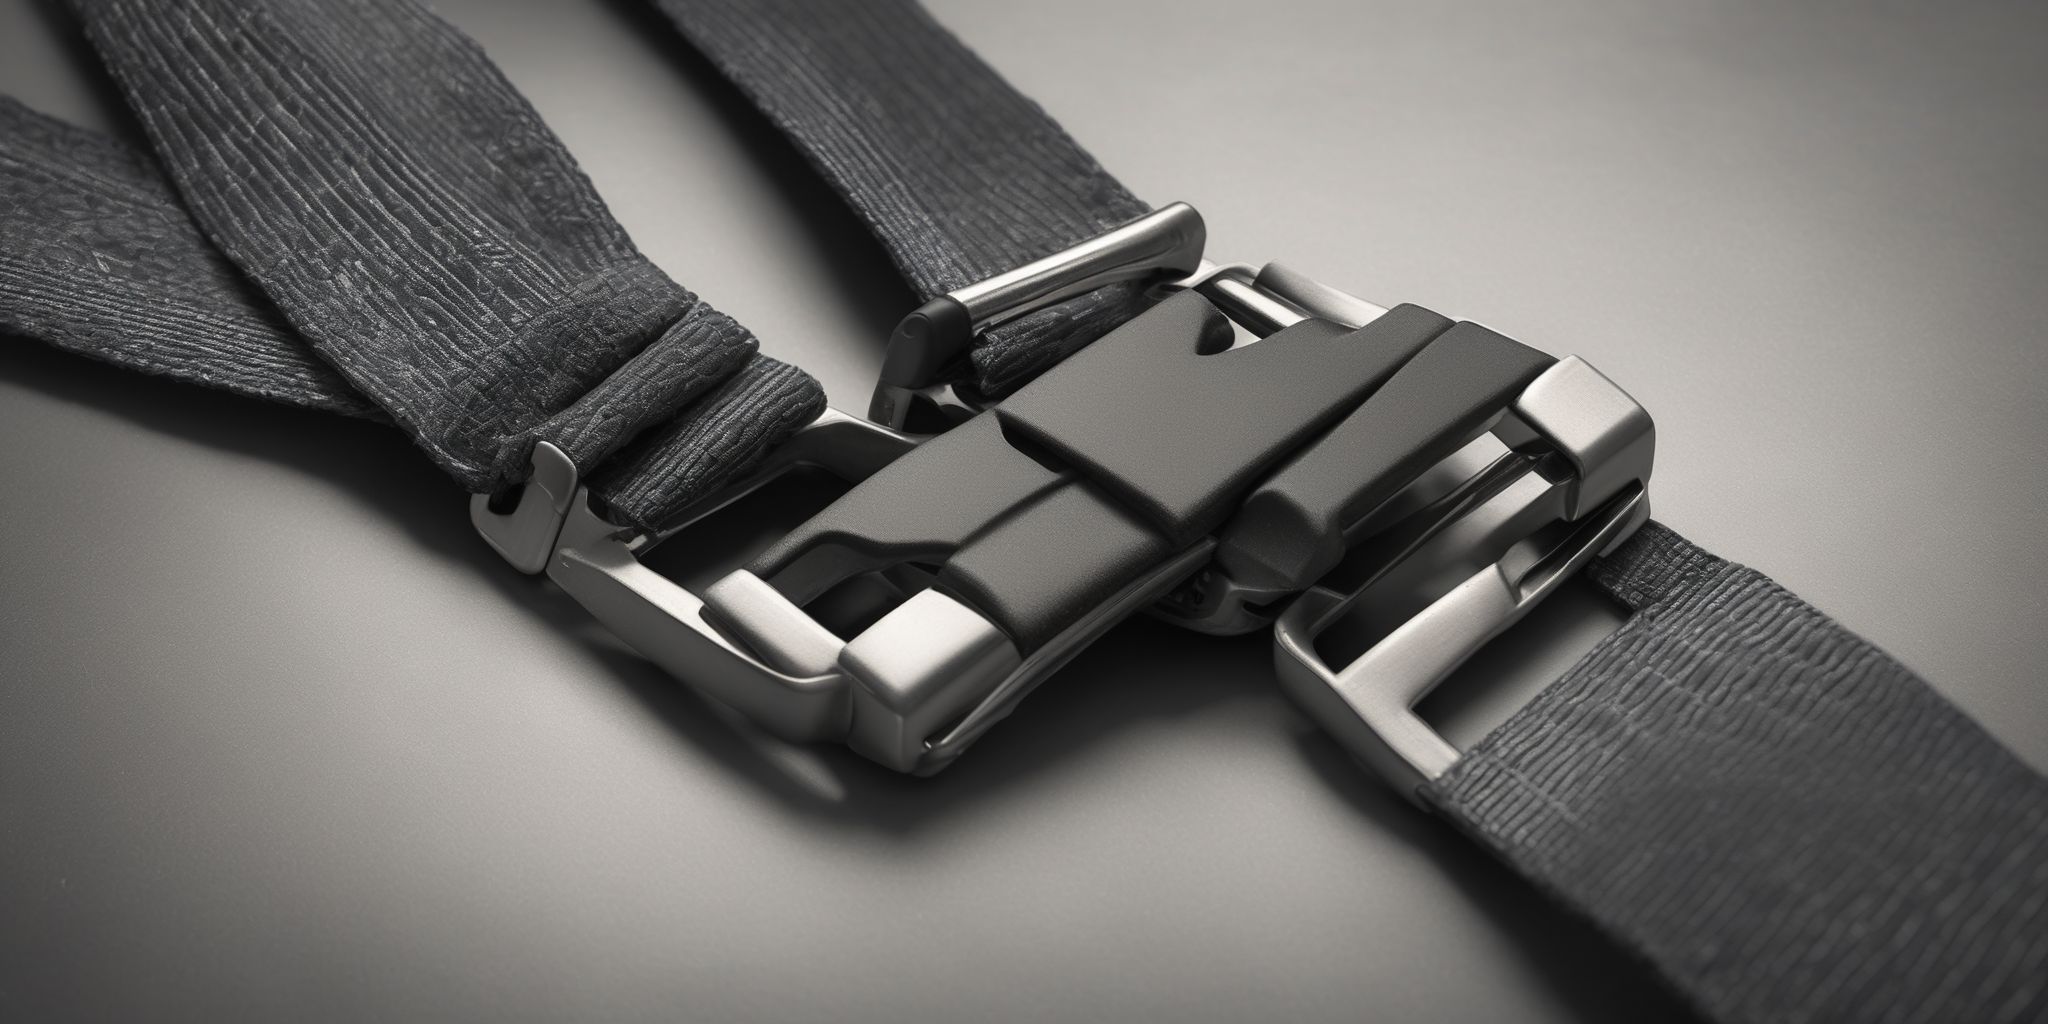 Seatbelt  in realistic, photographic style